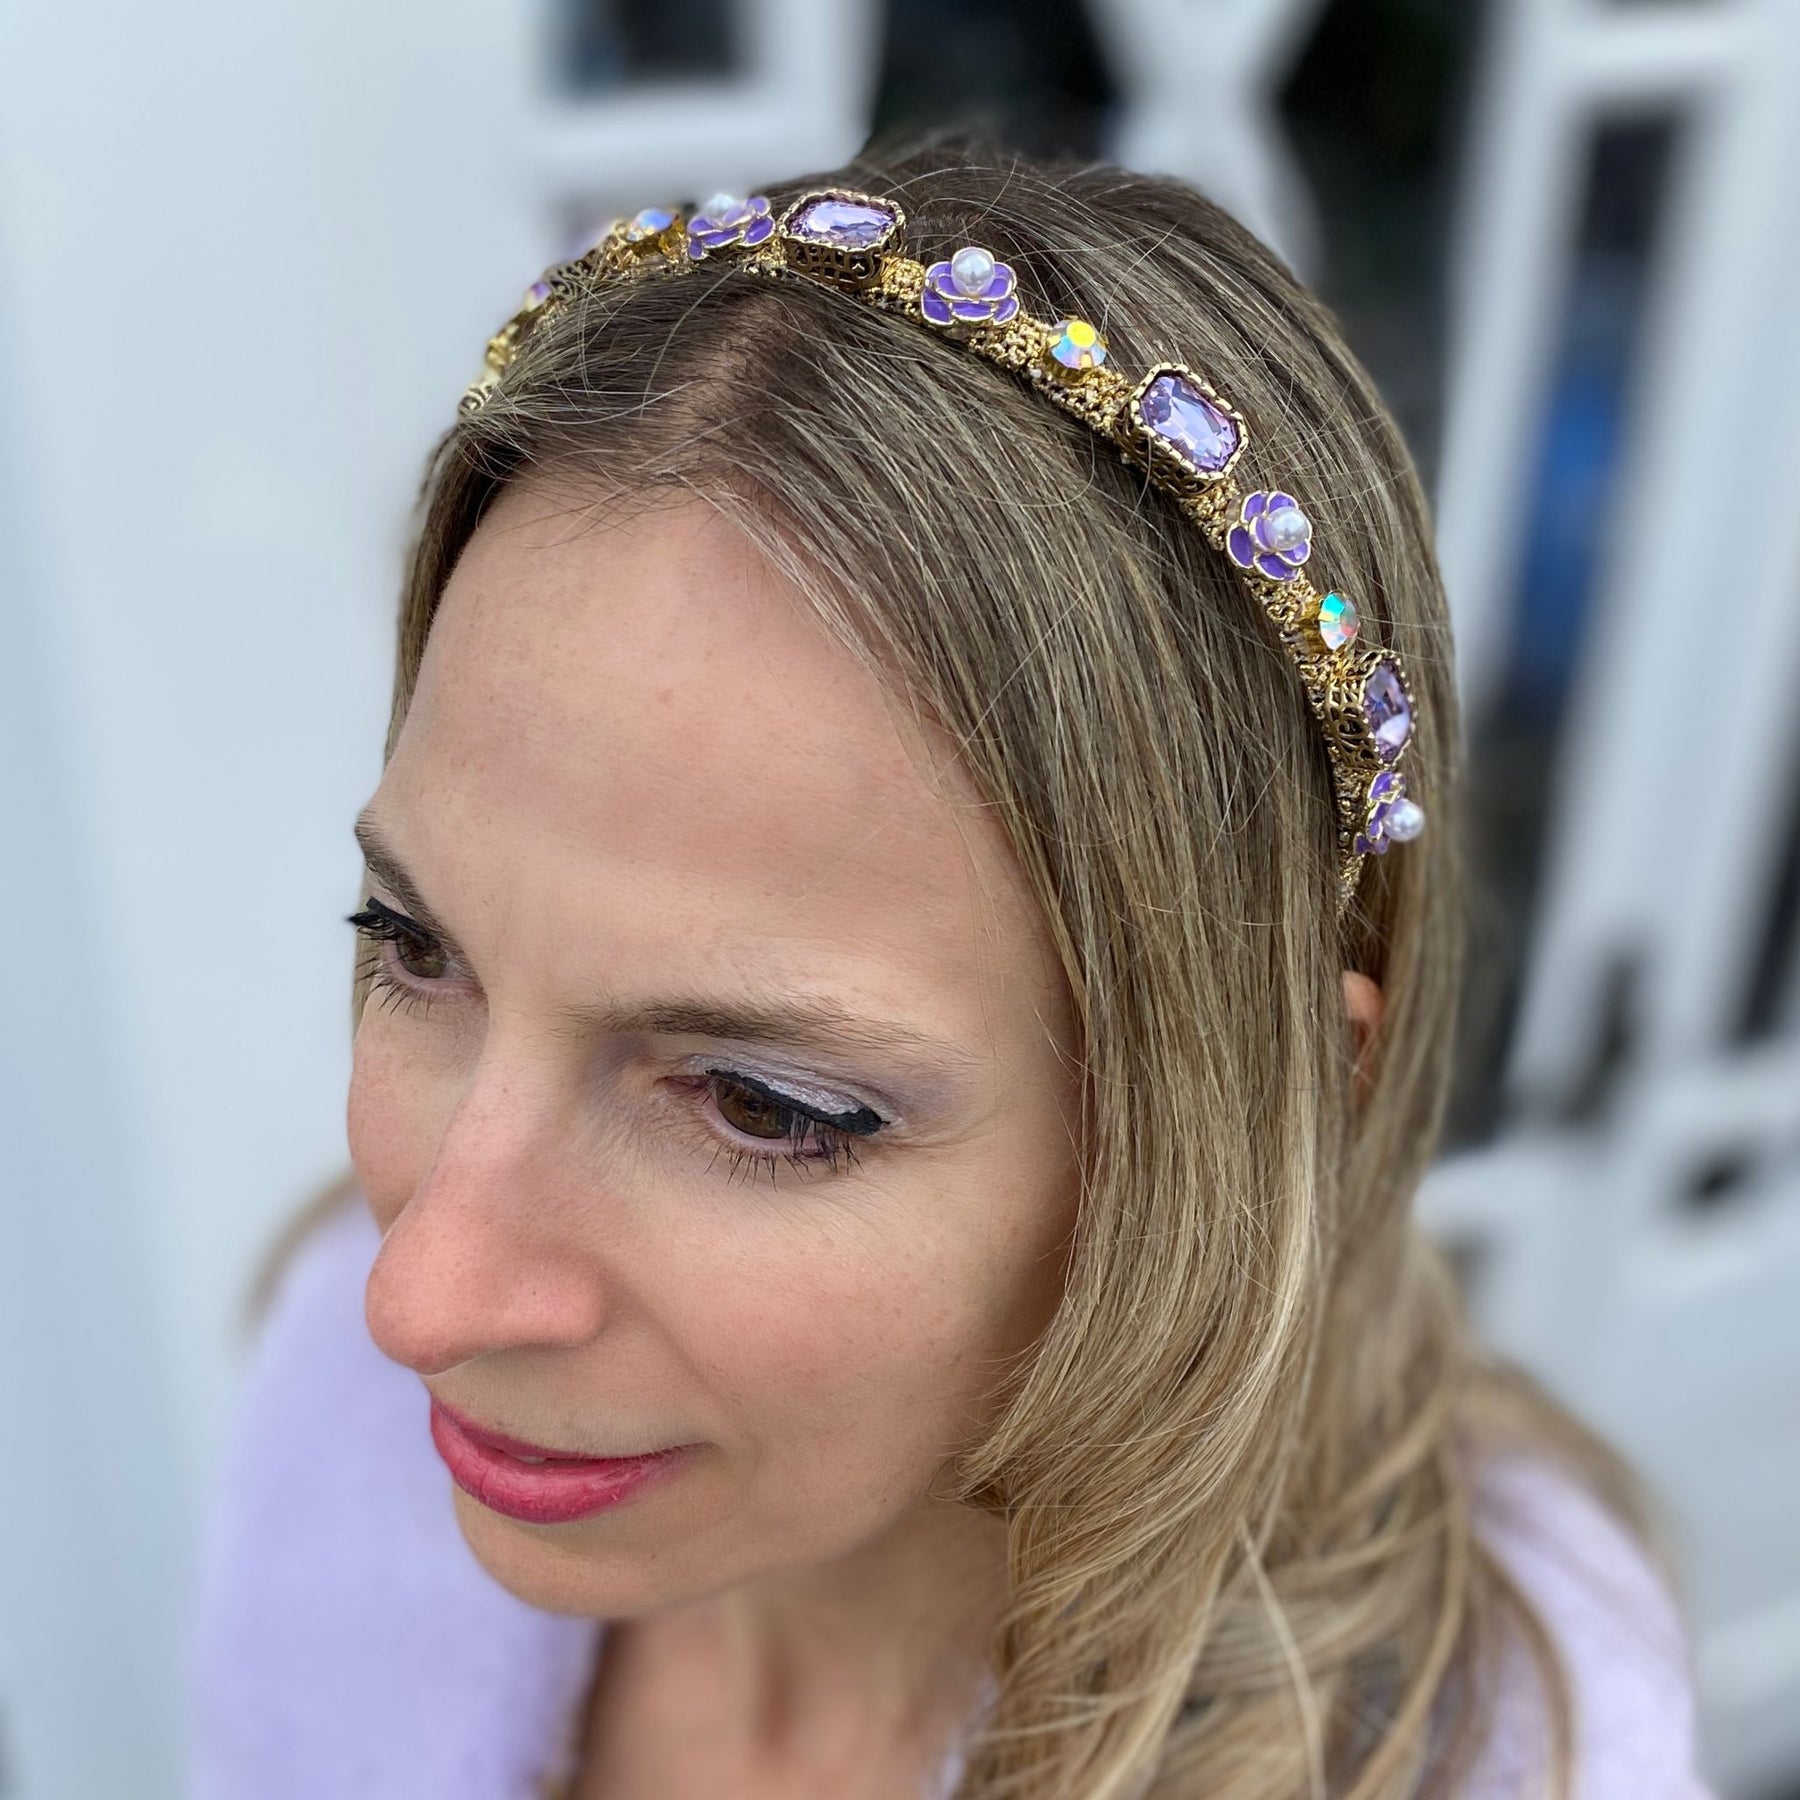 Hair Drama Co. Gold Plated Floral Hair Band with White Polki and Colorful  Stones - Red & Green: Buy Hair Drama Co. Gold Plated Floral Hair Band with  White Polki and Colorful